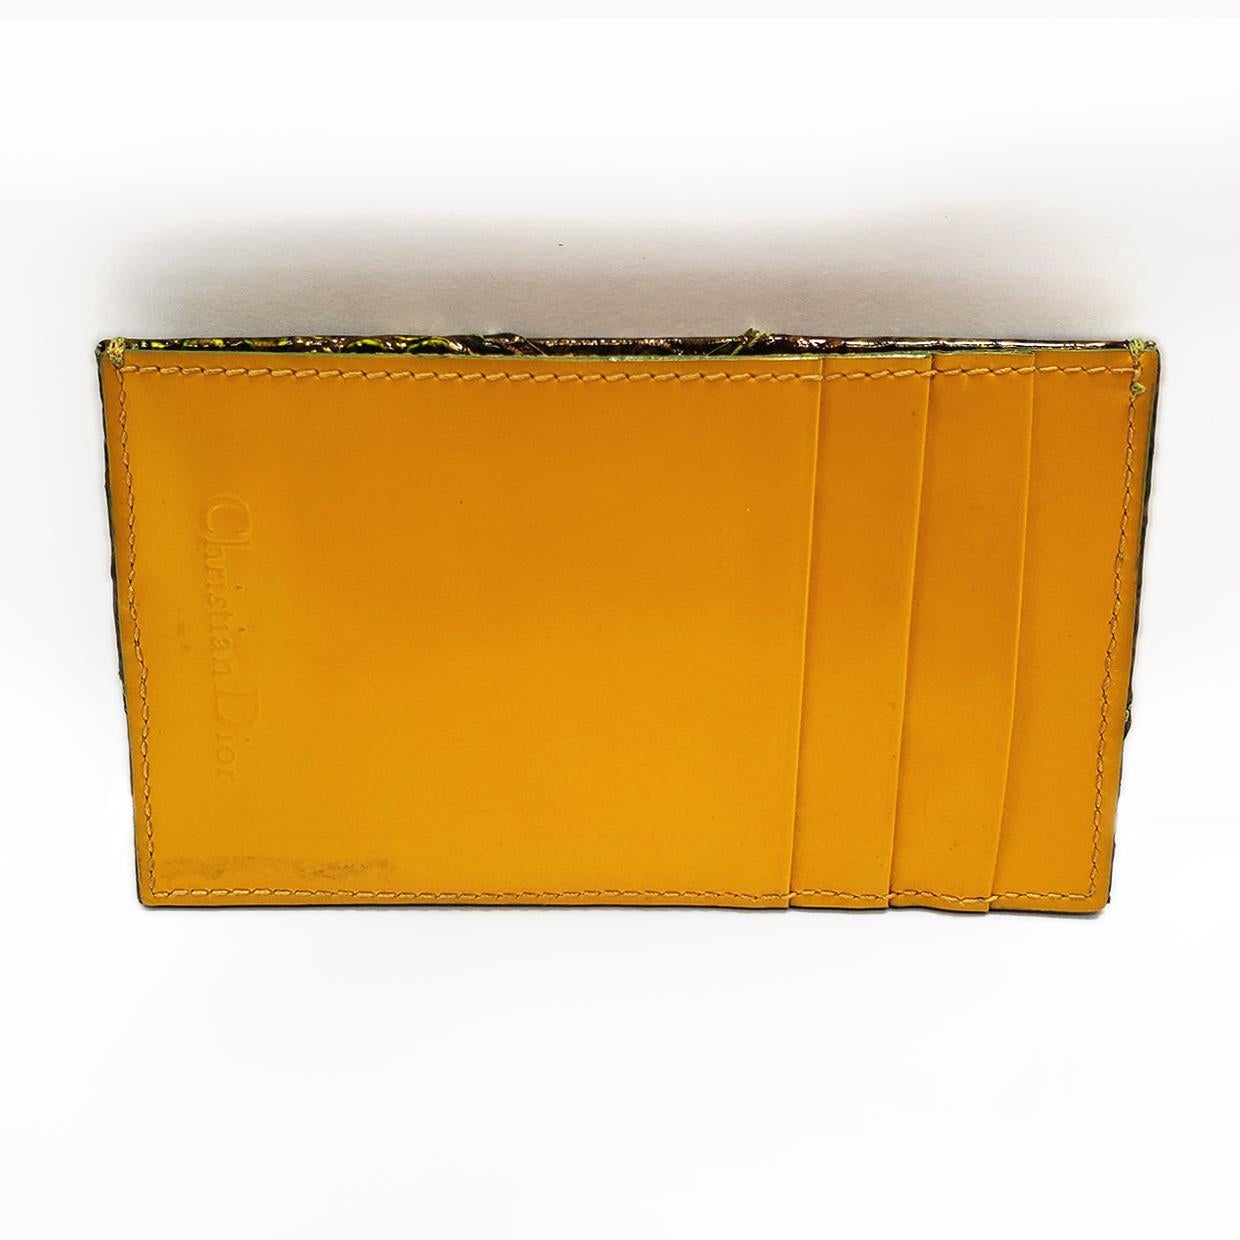 Brand - Dior
Style - Card Holder
Material - Leather
Color - Green and Yellow
Feature - Wallet
Bag Depth - 0.2 in
Bag Width - 4.5 in
Bag Height - 2.75 in

The House of Dior was founded in December 1946 in Paris by Christian Dior. However, Dior